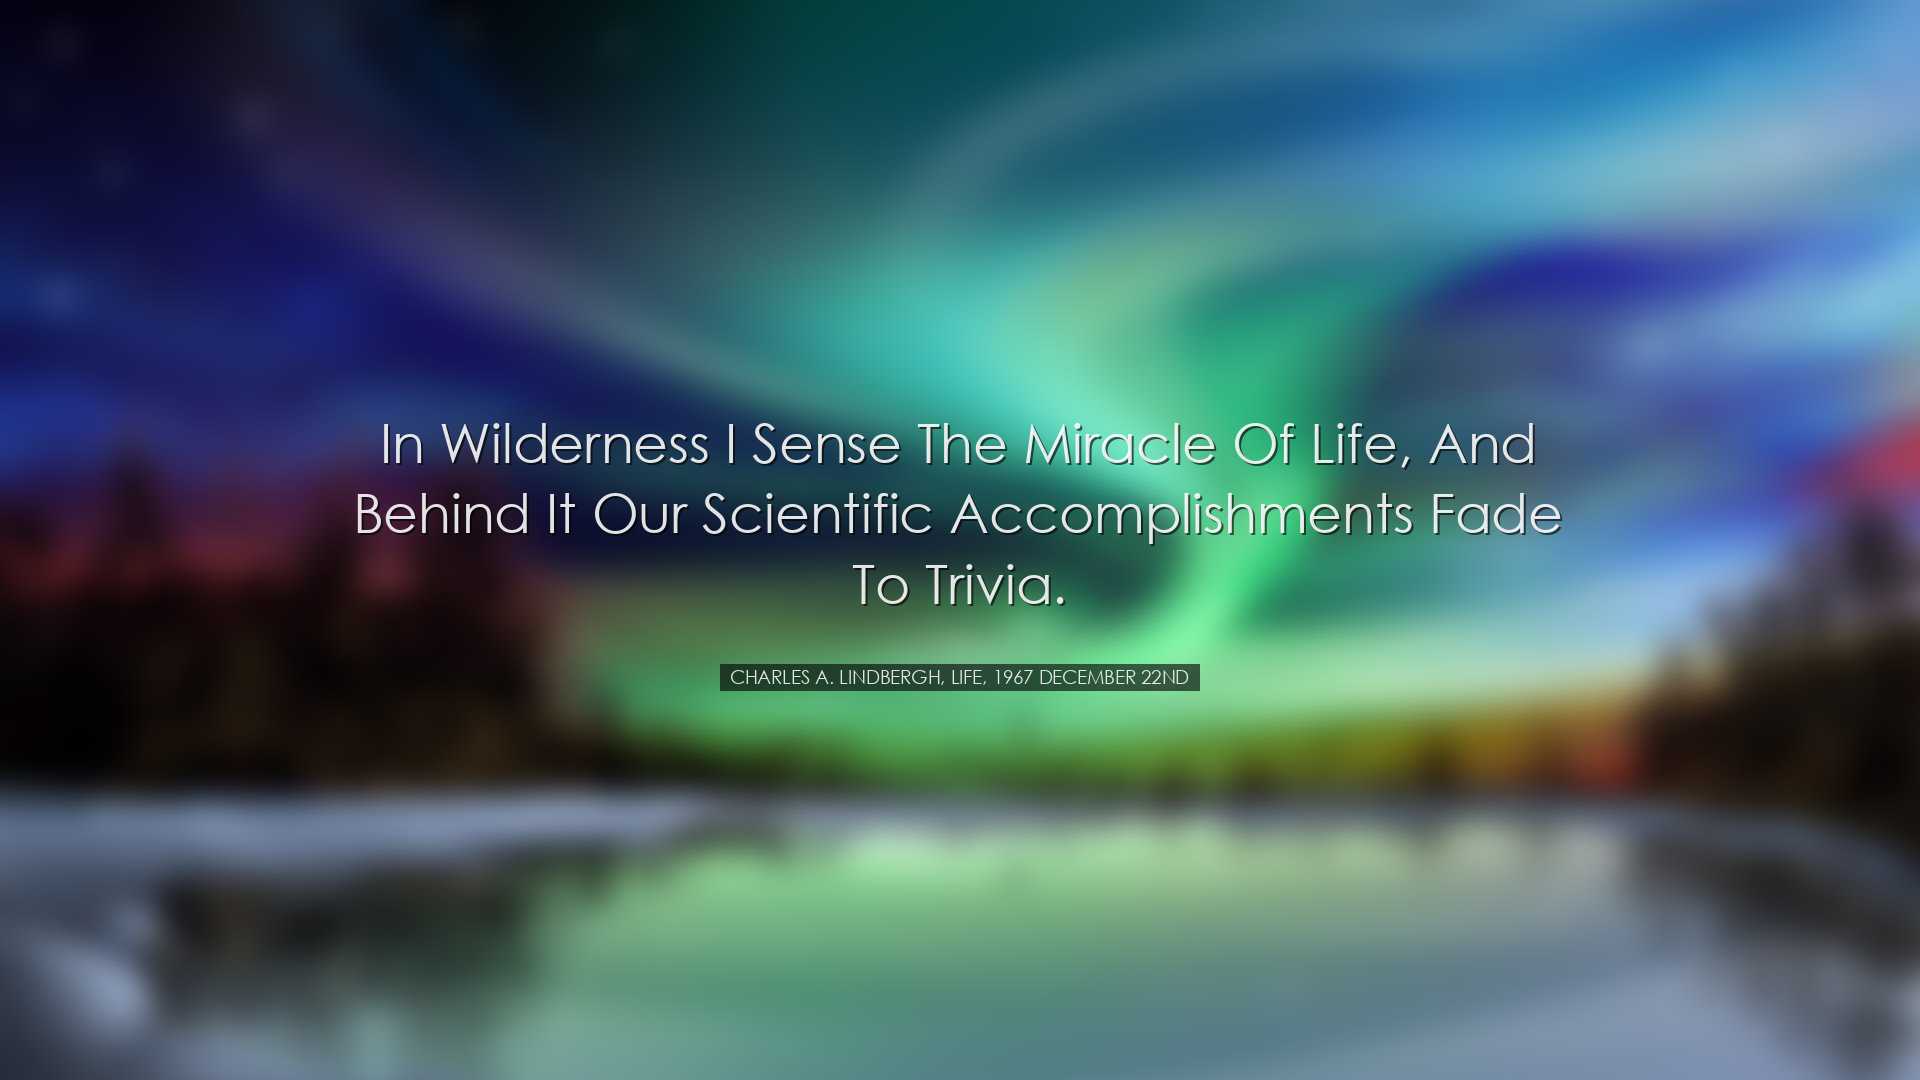 In wilderness I sense the miracle of life, and behind it our scien